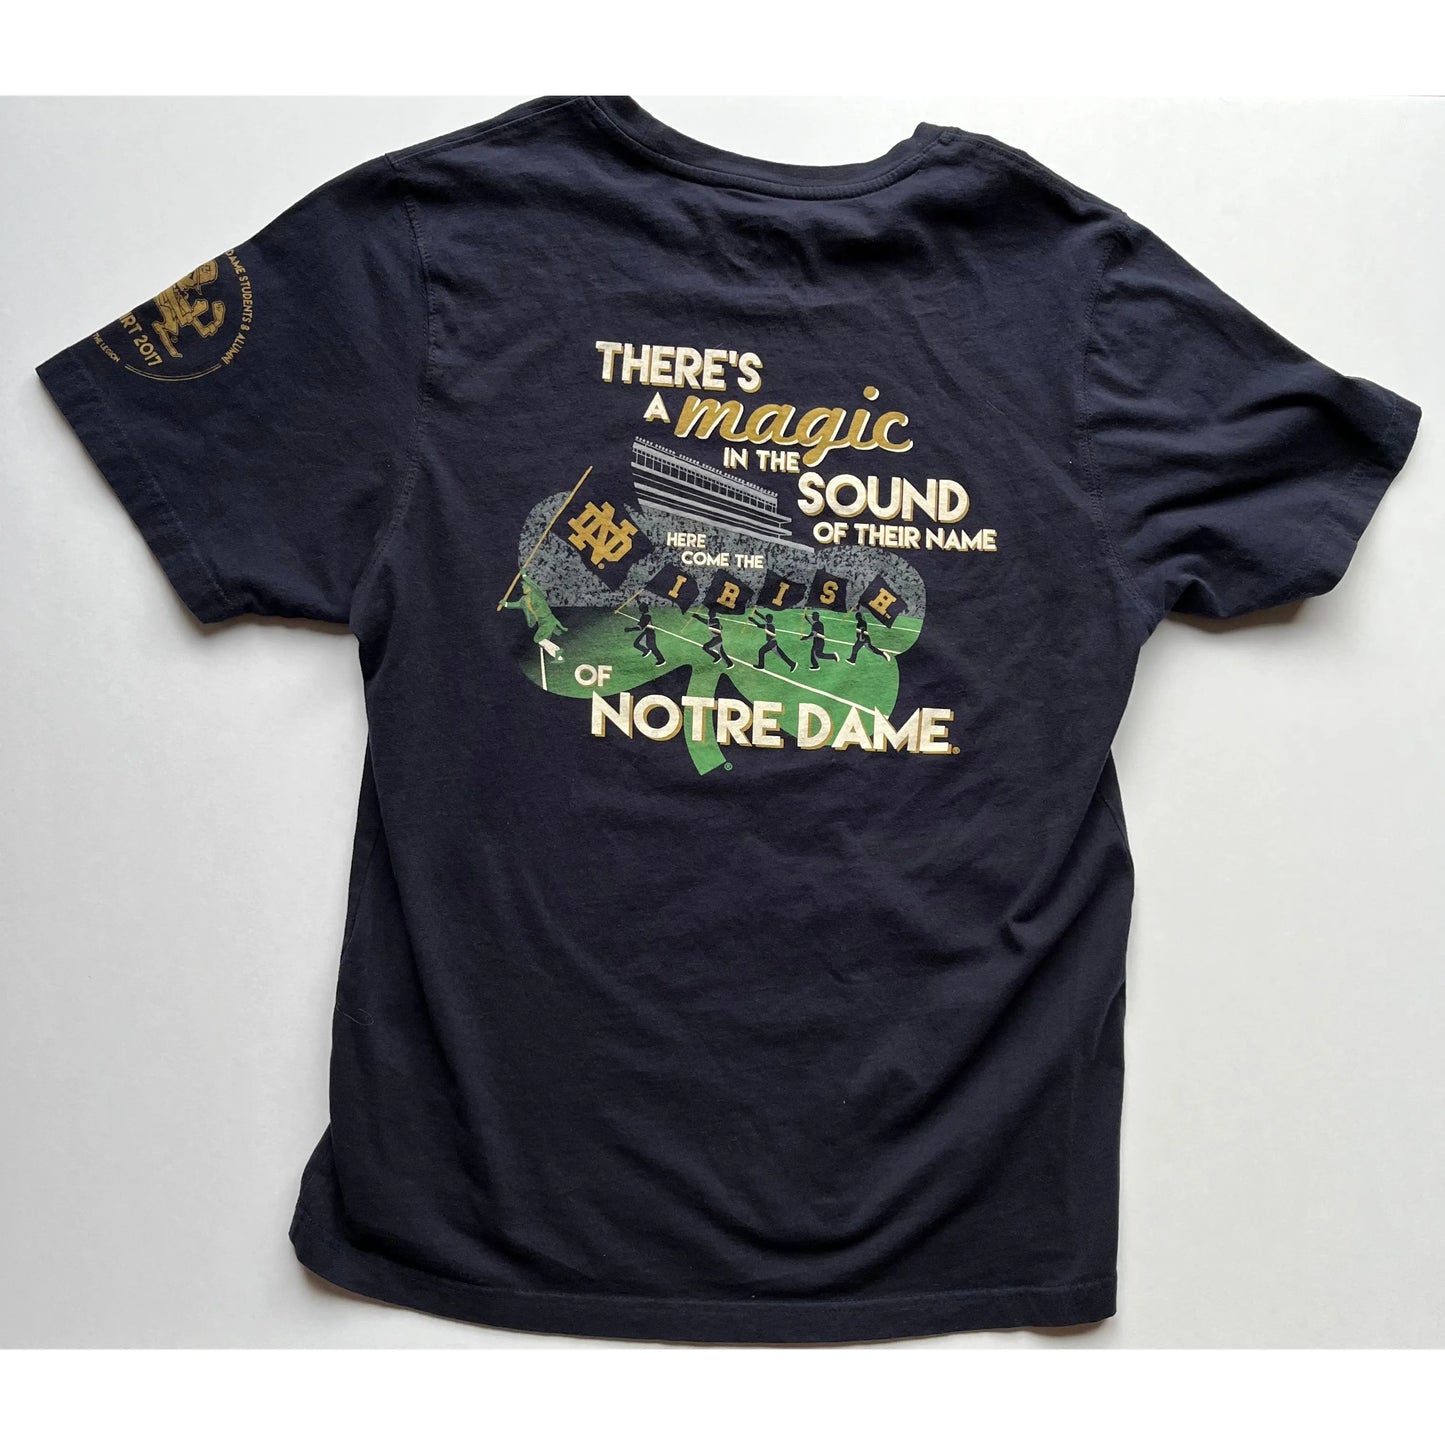 Notre Dame - Colosseum Tee (Large)